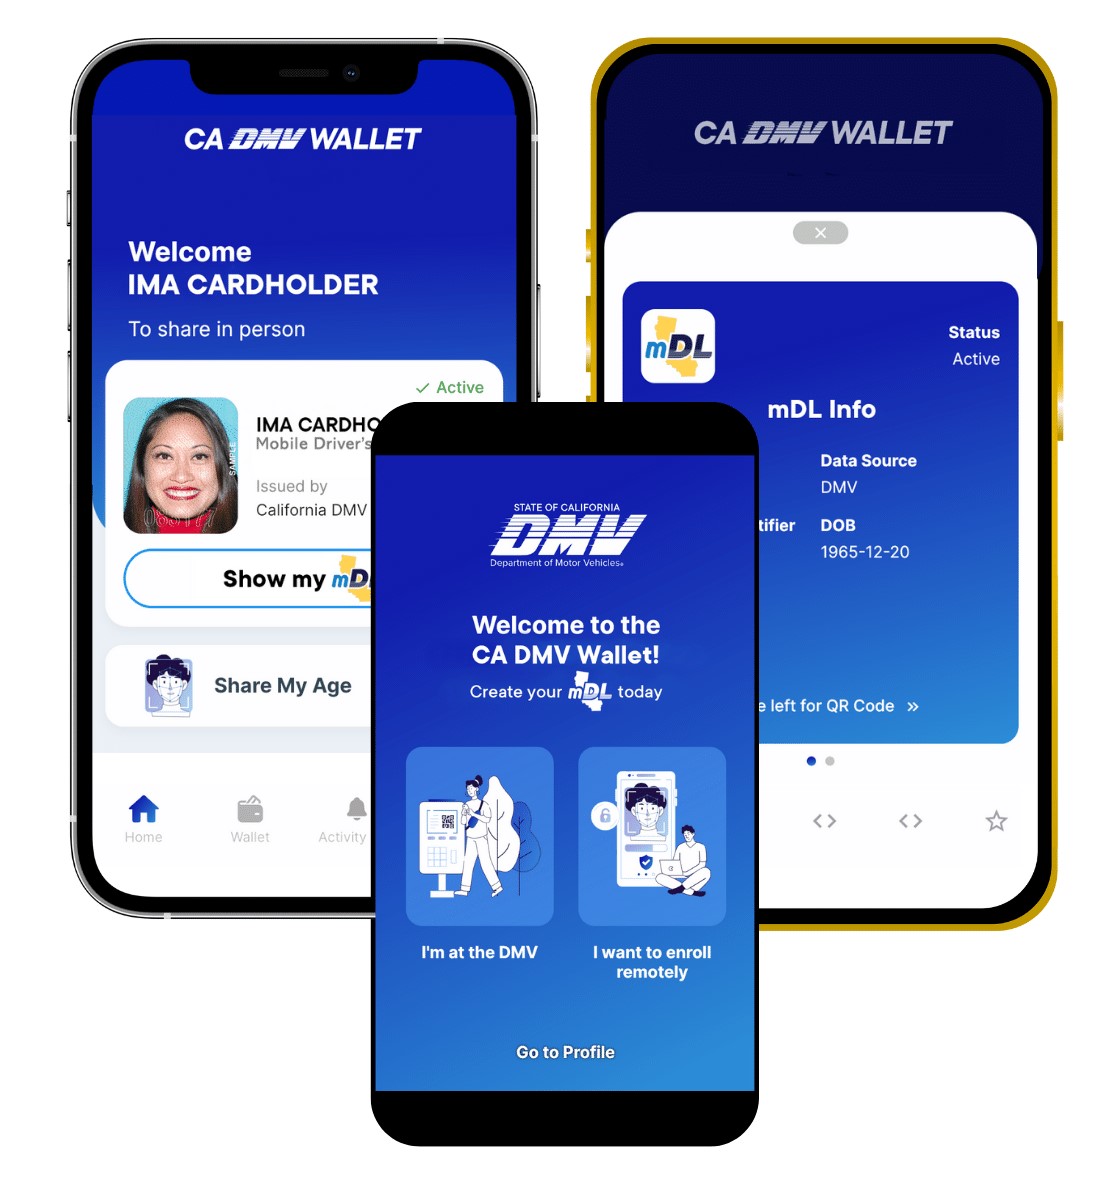 images of mobile phones and what the CA DMV Wallet would look like. 